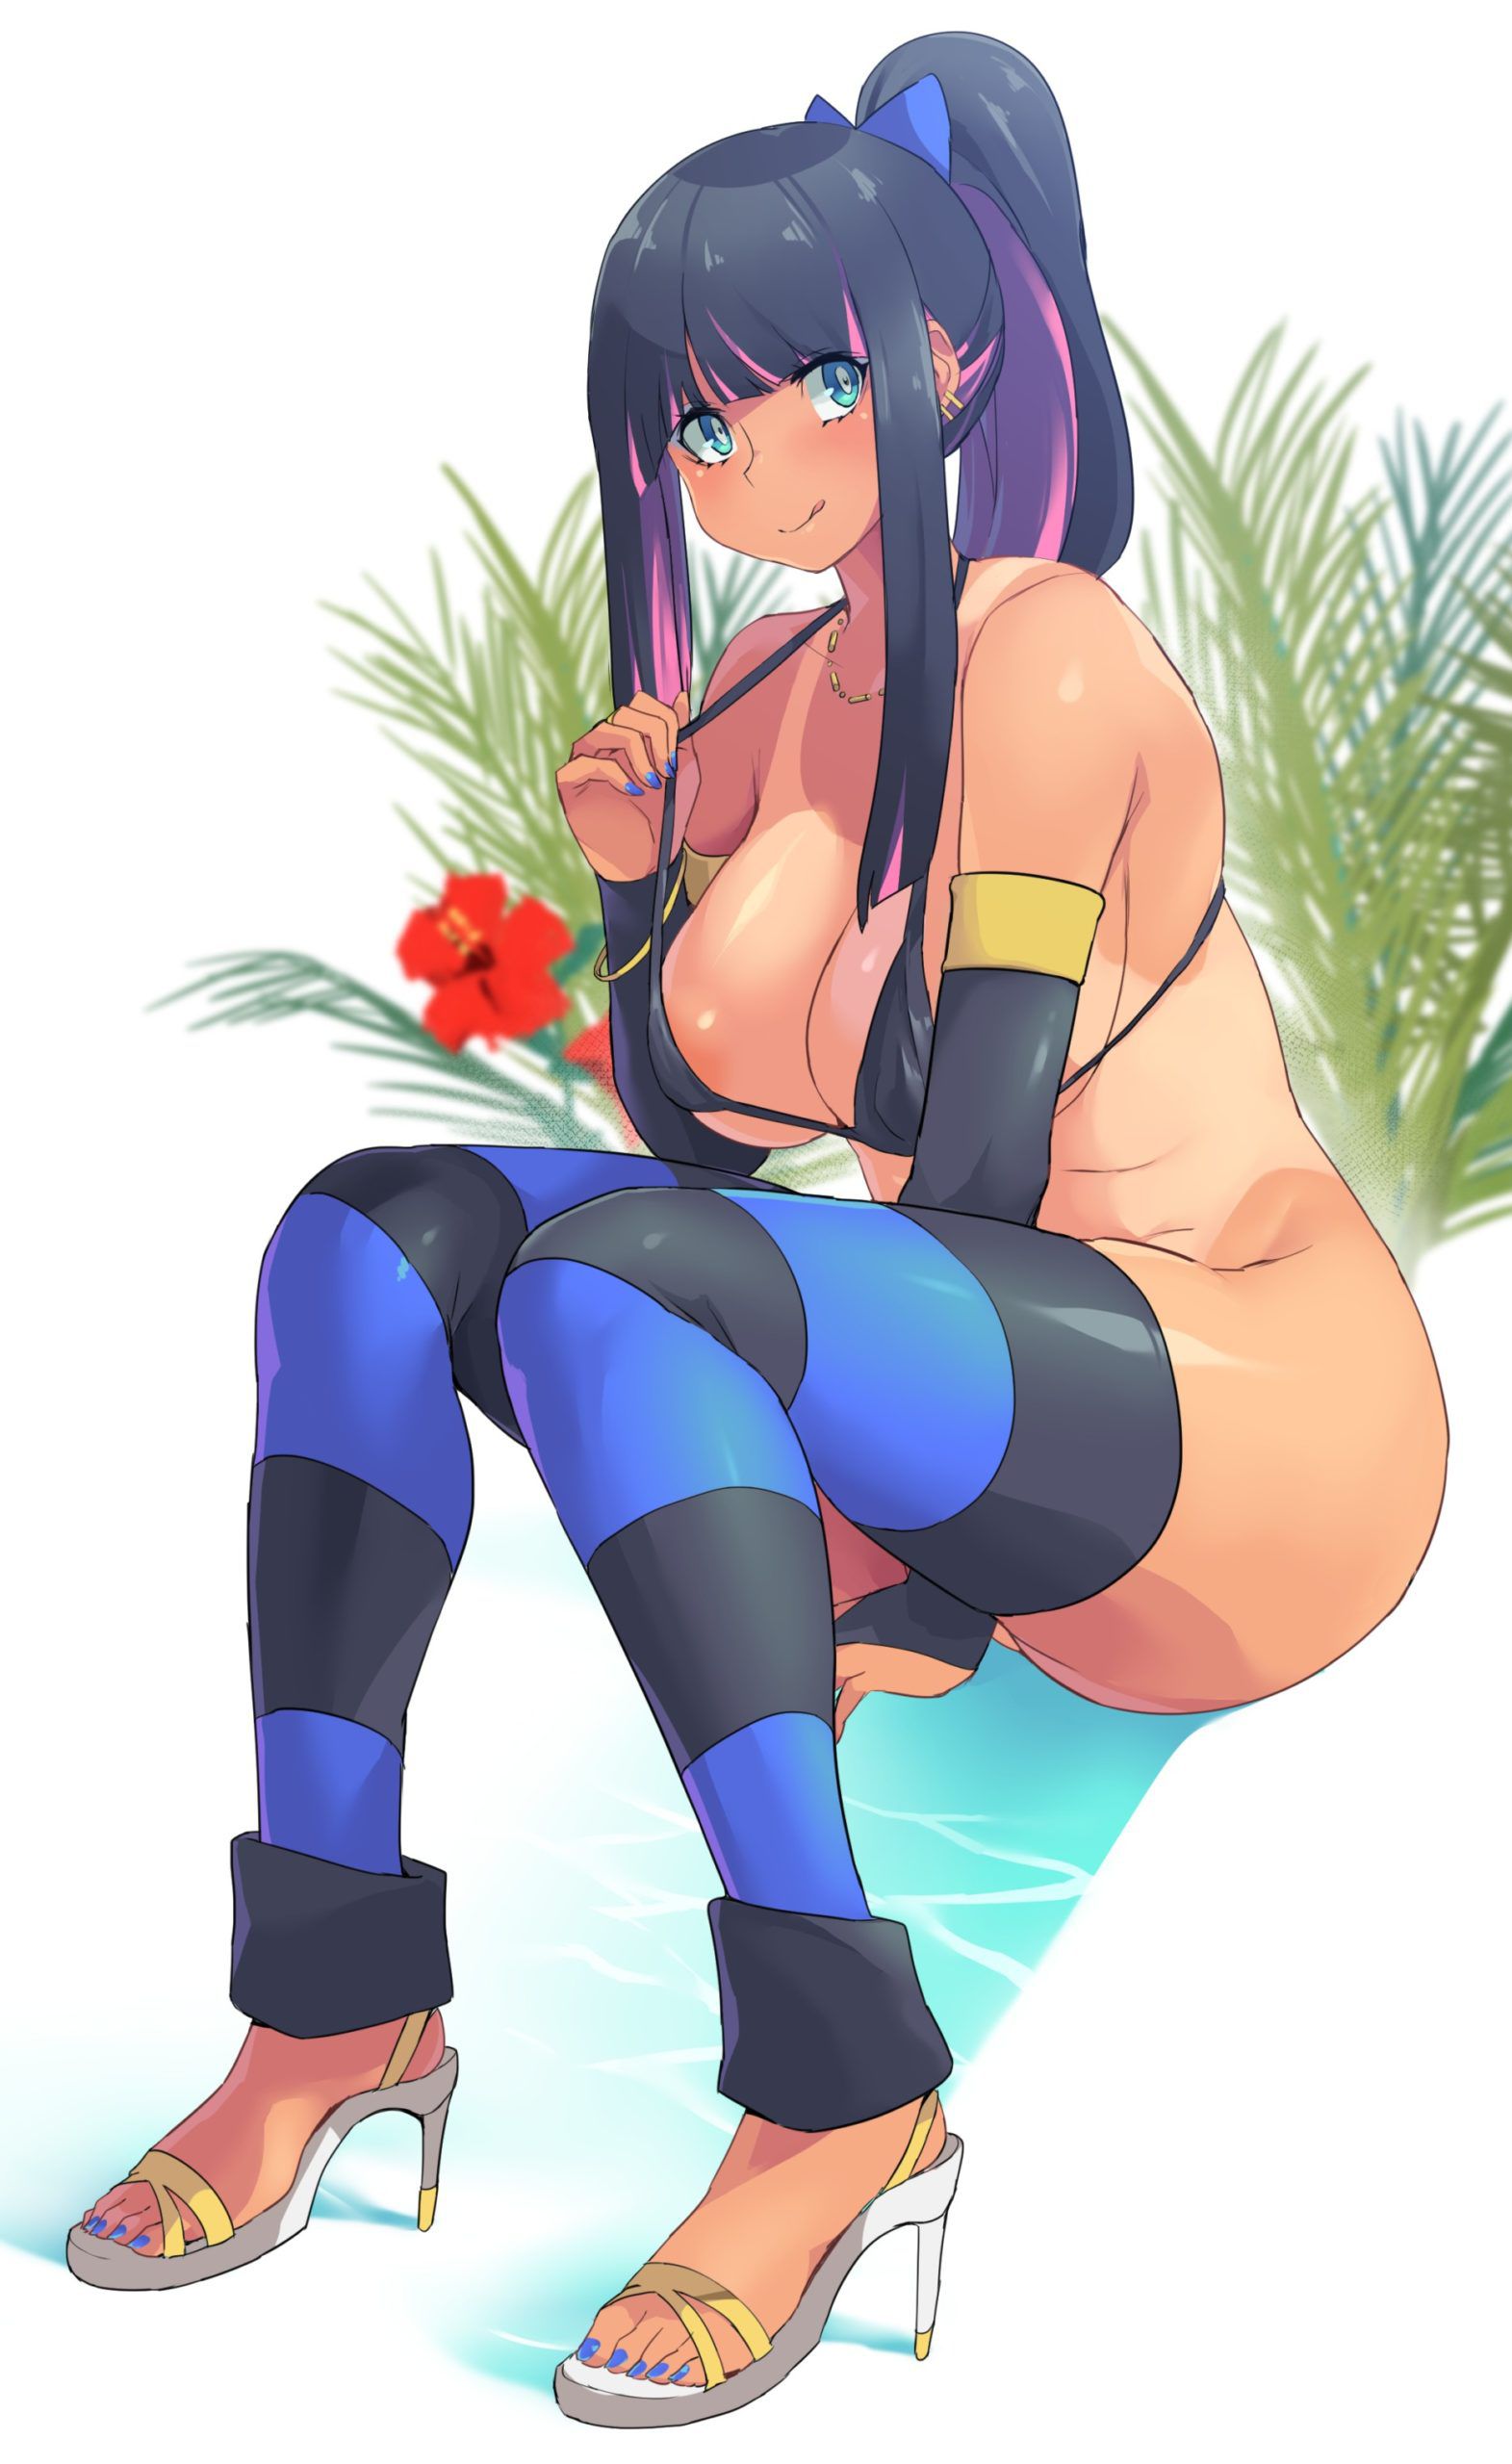 【2nd】Erotic image of a girl with a sunburn after Part 10 10